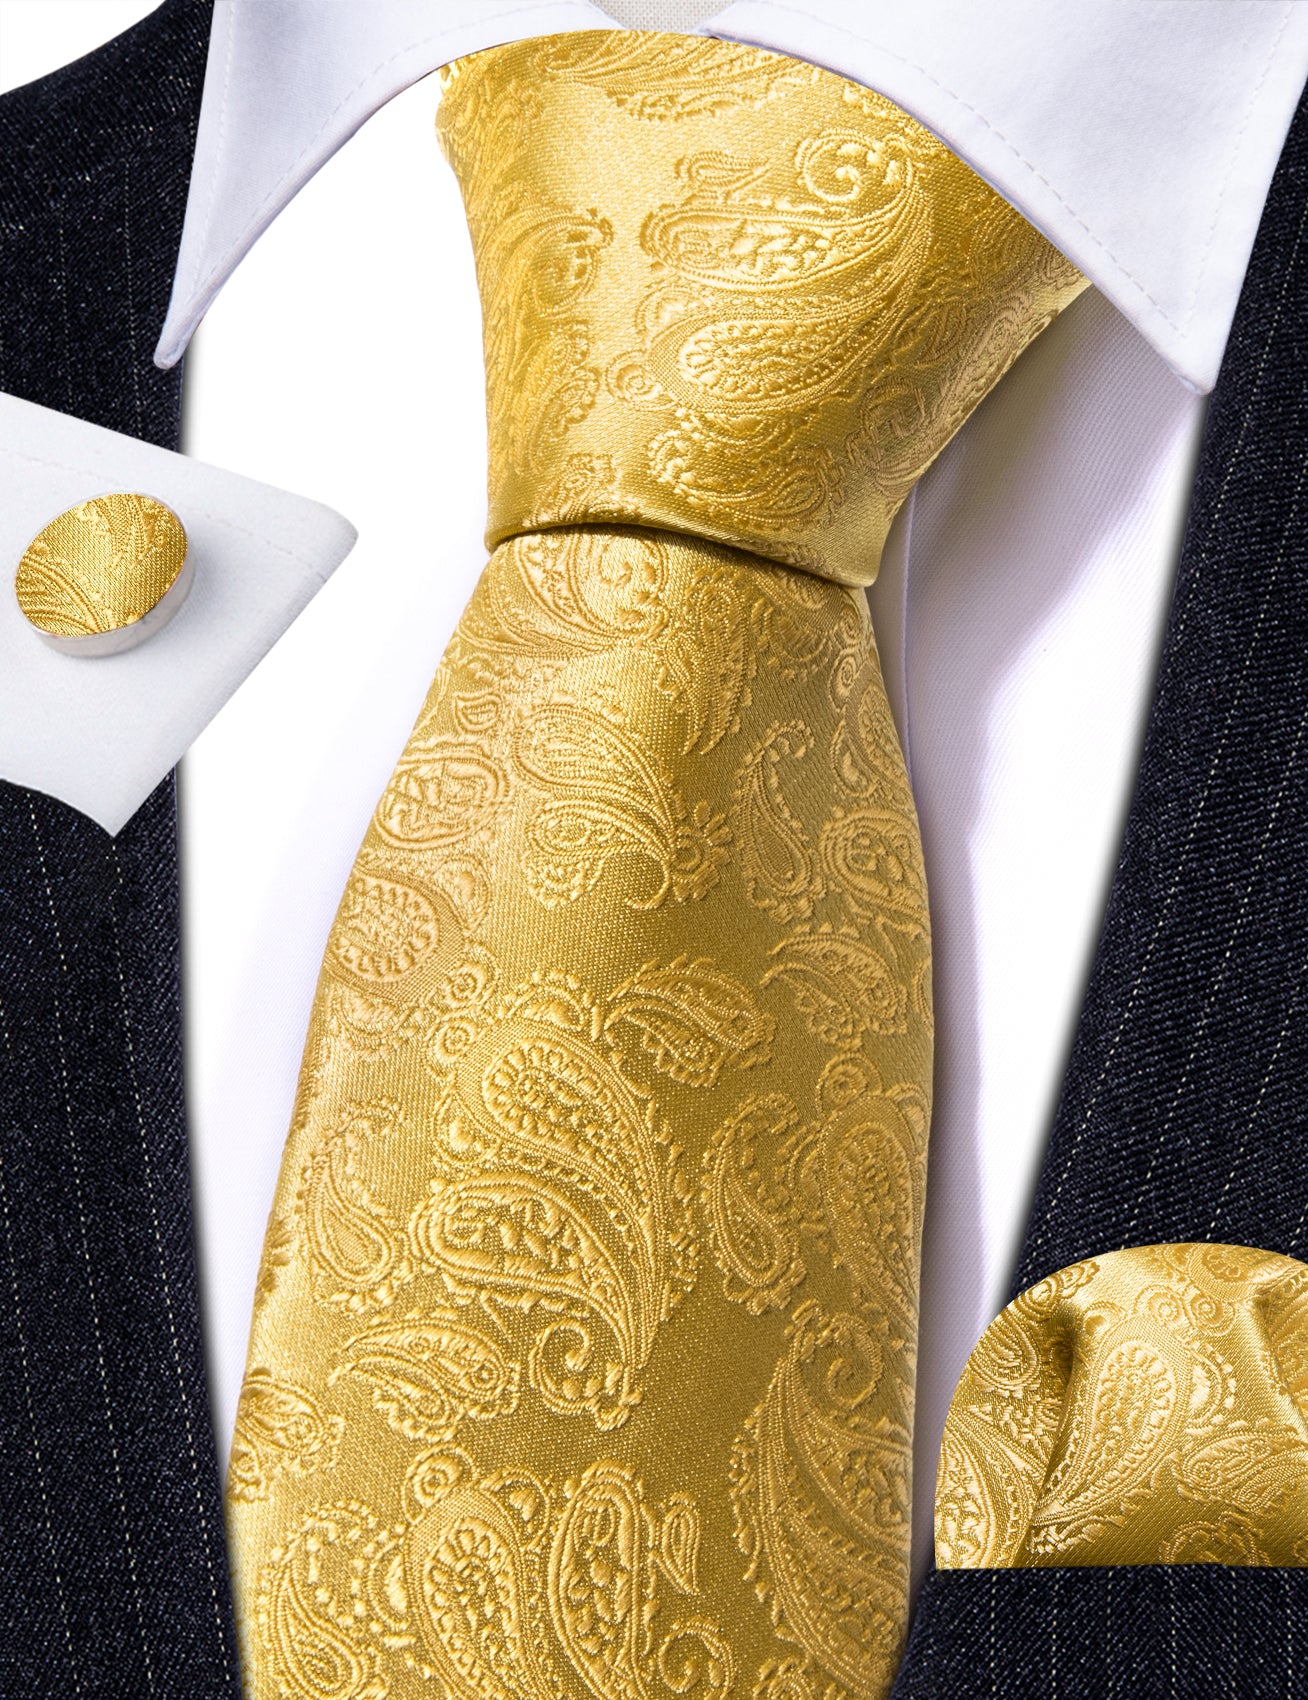 Gold Paisley Silk 63 Inches Extra Long Tie Hanky Cufflinks Set